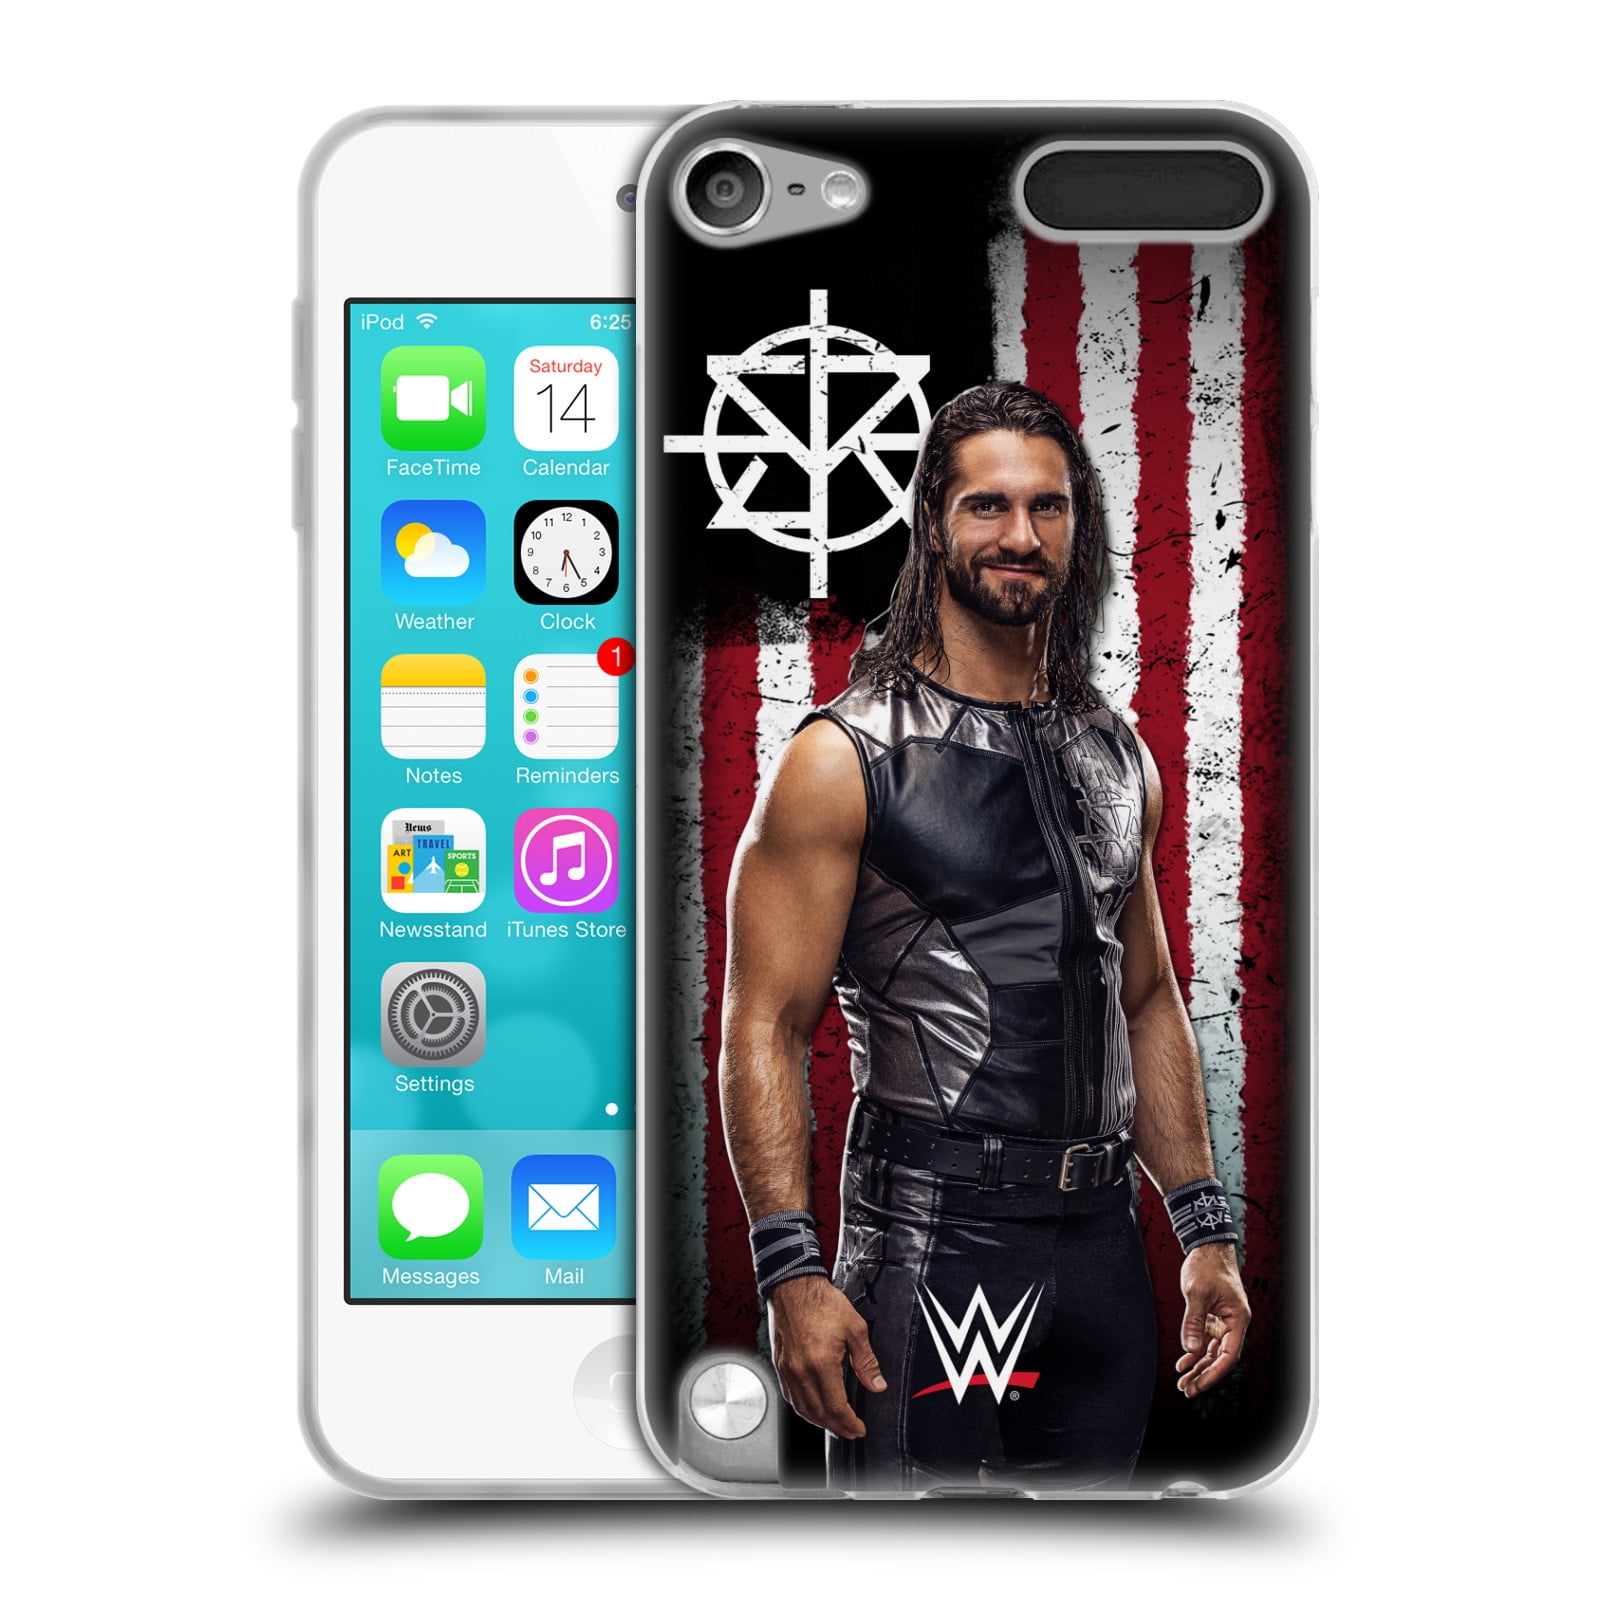 Head Case Designs Officially Licensed WWE AJ Styles Superstars Hard Back Case Compatible with Apple iPod Touch 5G 5th Gen 